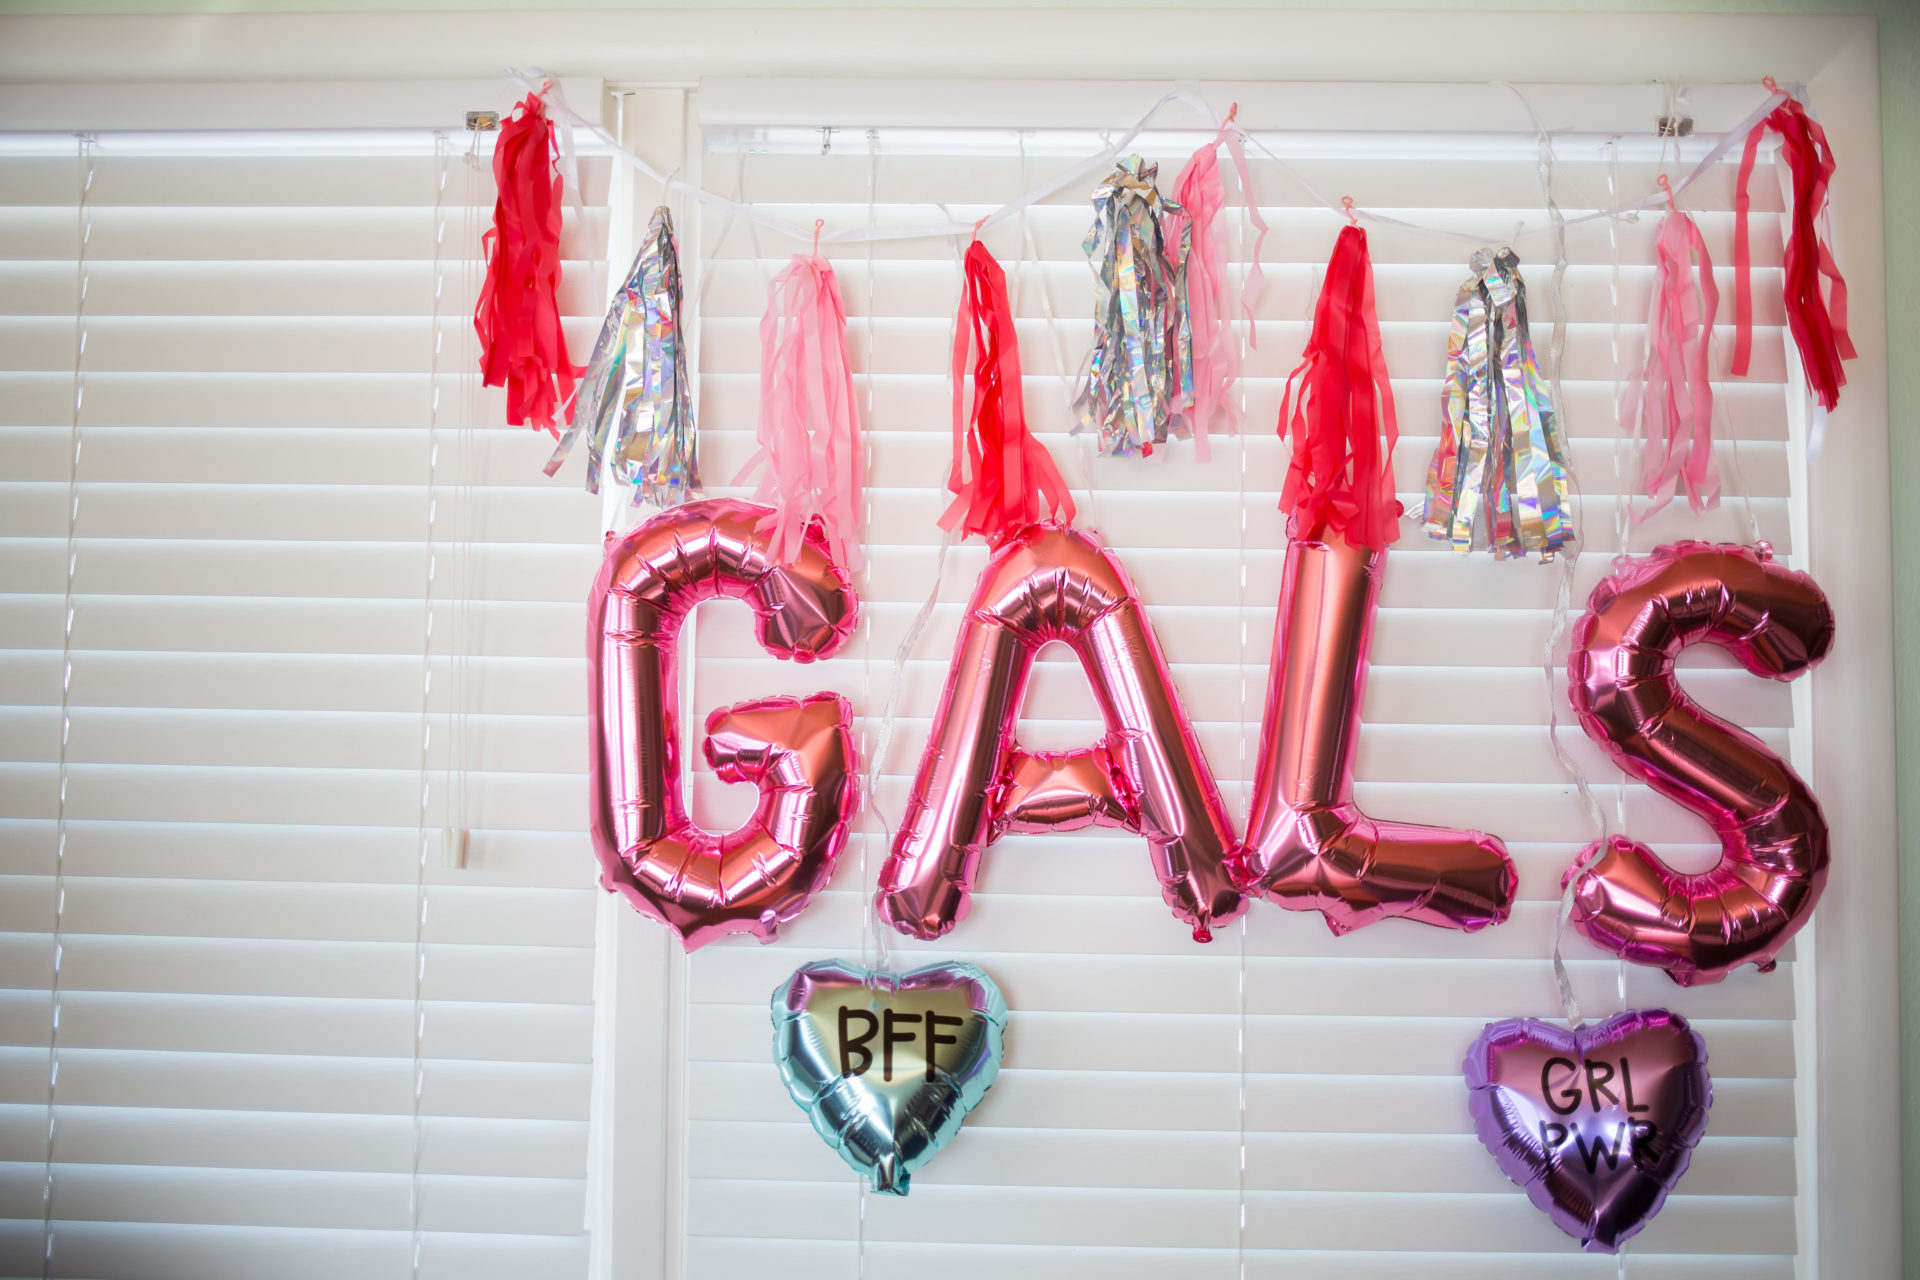 How To Host a 90's Themed Galentines Party! - Living in Yellow5287 x 3525